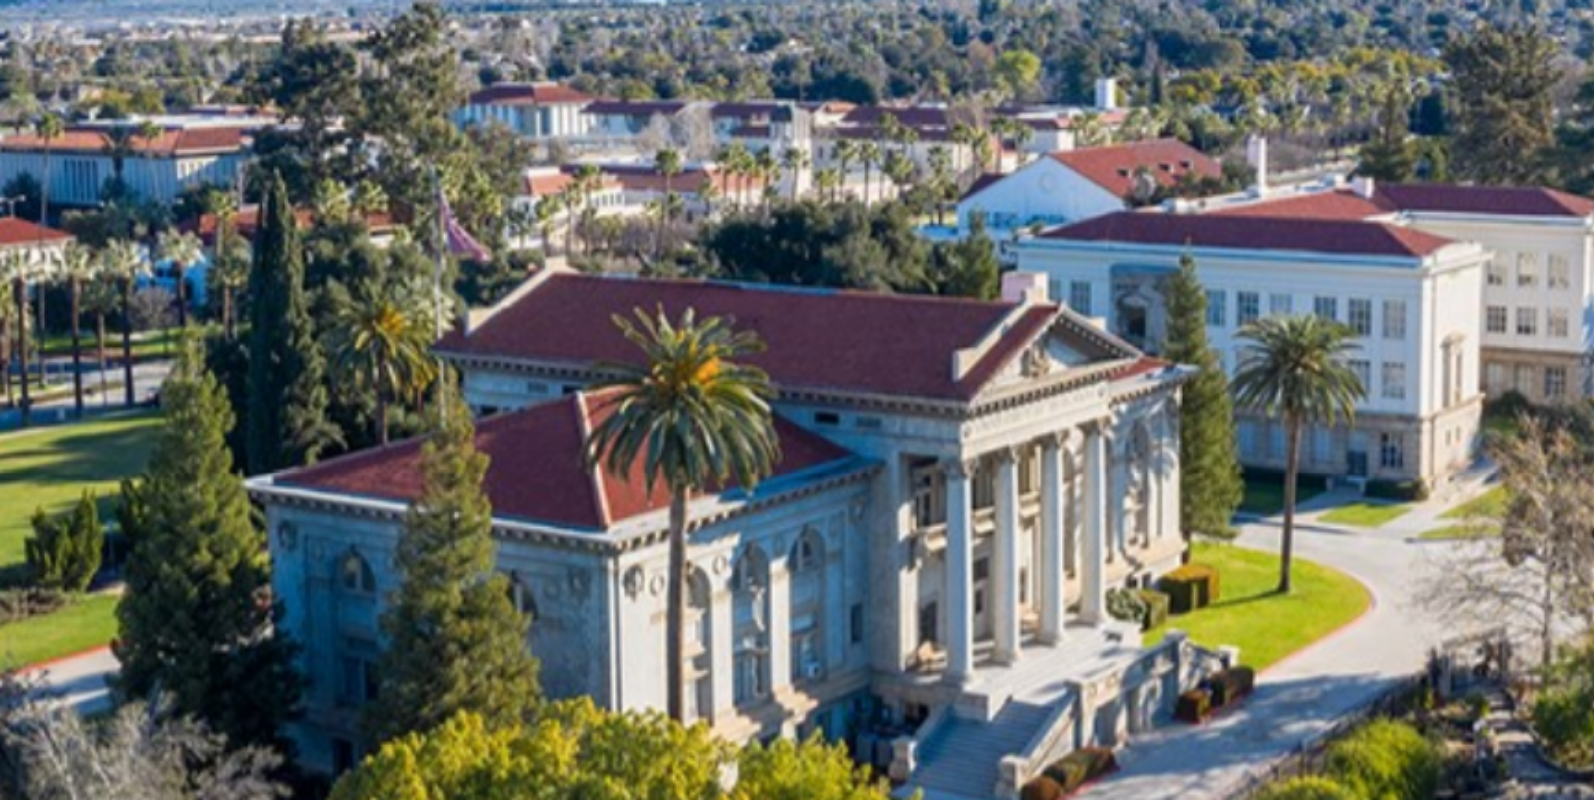 University of Redlands: Rankings, Notable Alumni, Admissions, Acceptance Rate, Fees, Courses, Majors and everything